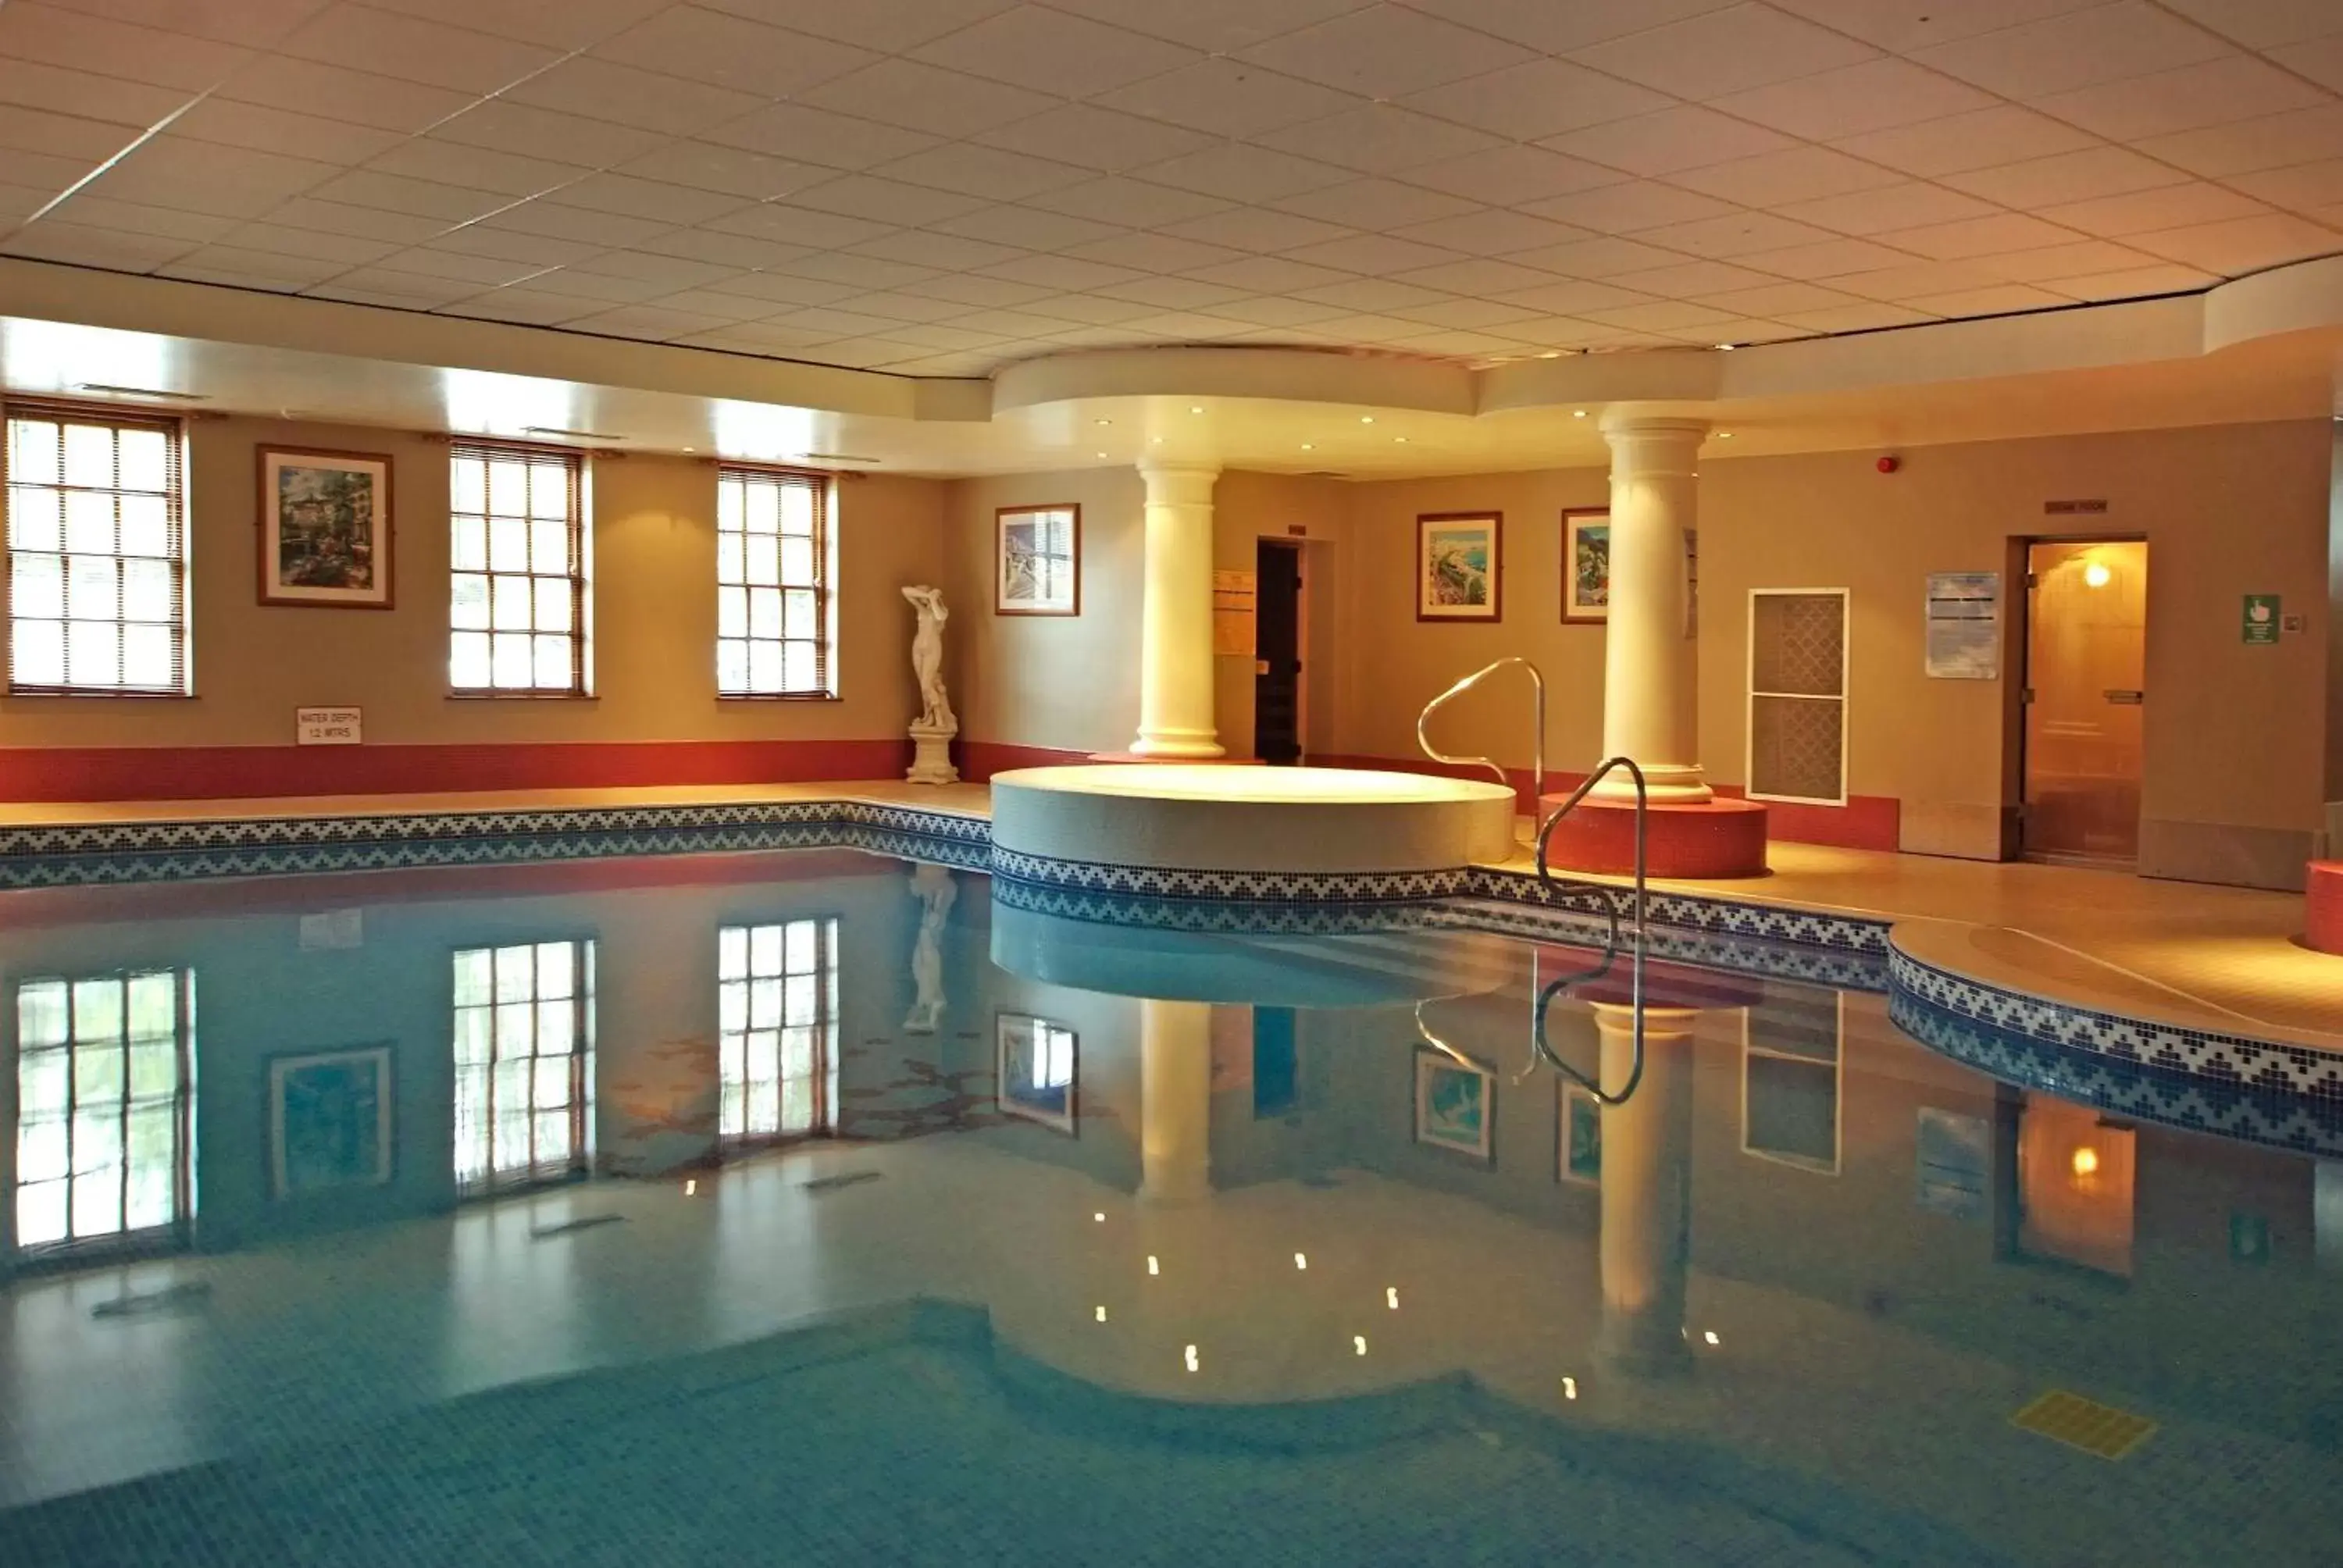 Swimming Pool in The Crown Hotel, Boroughbridge, North Yorkshire